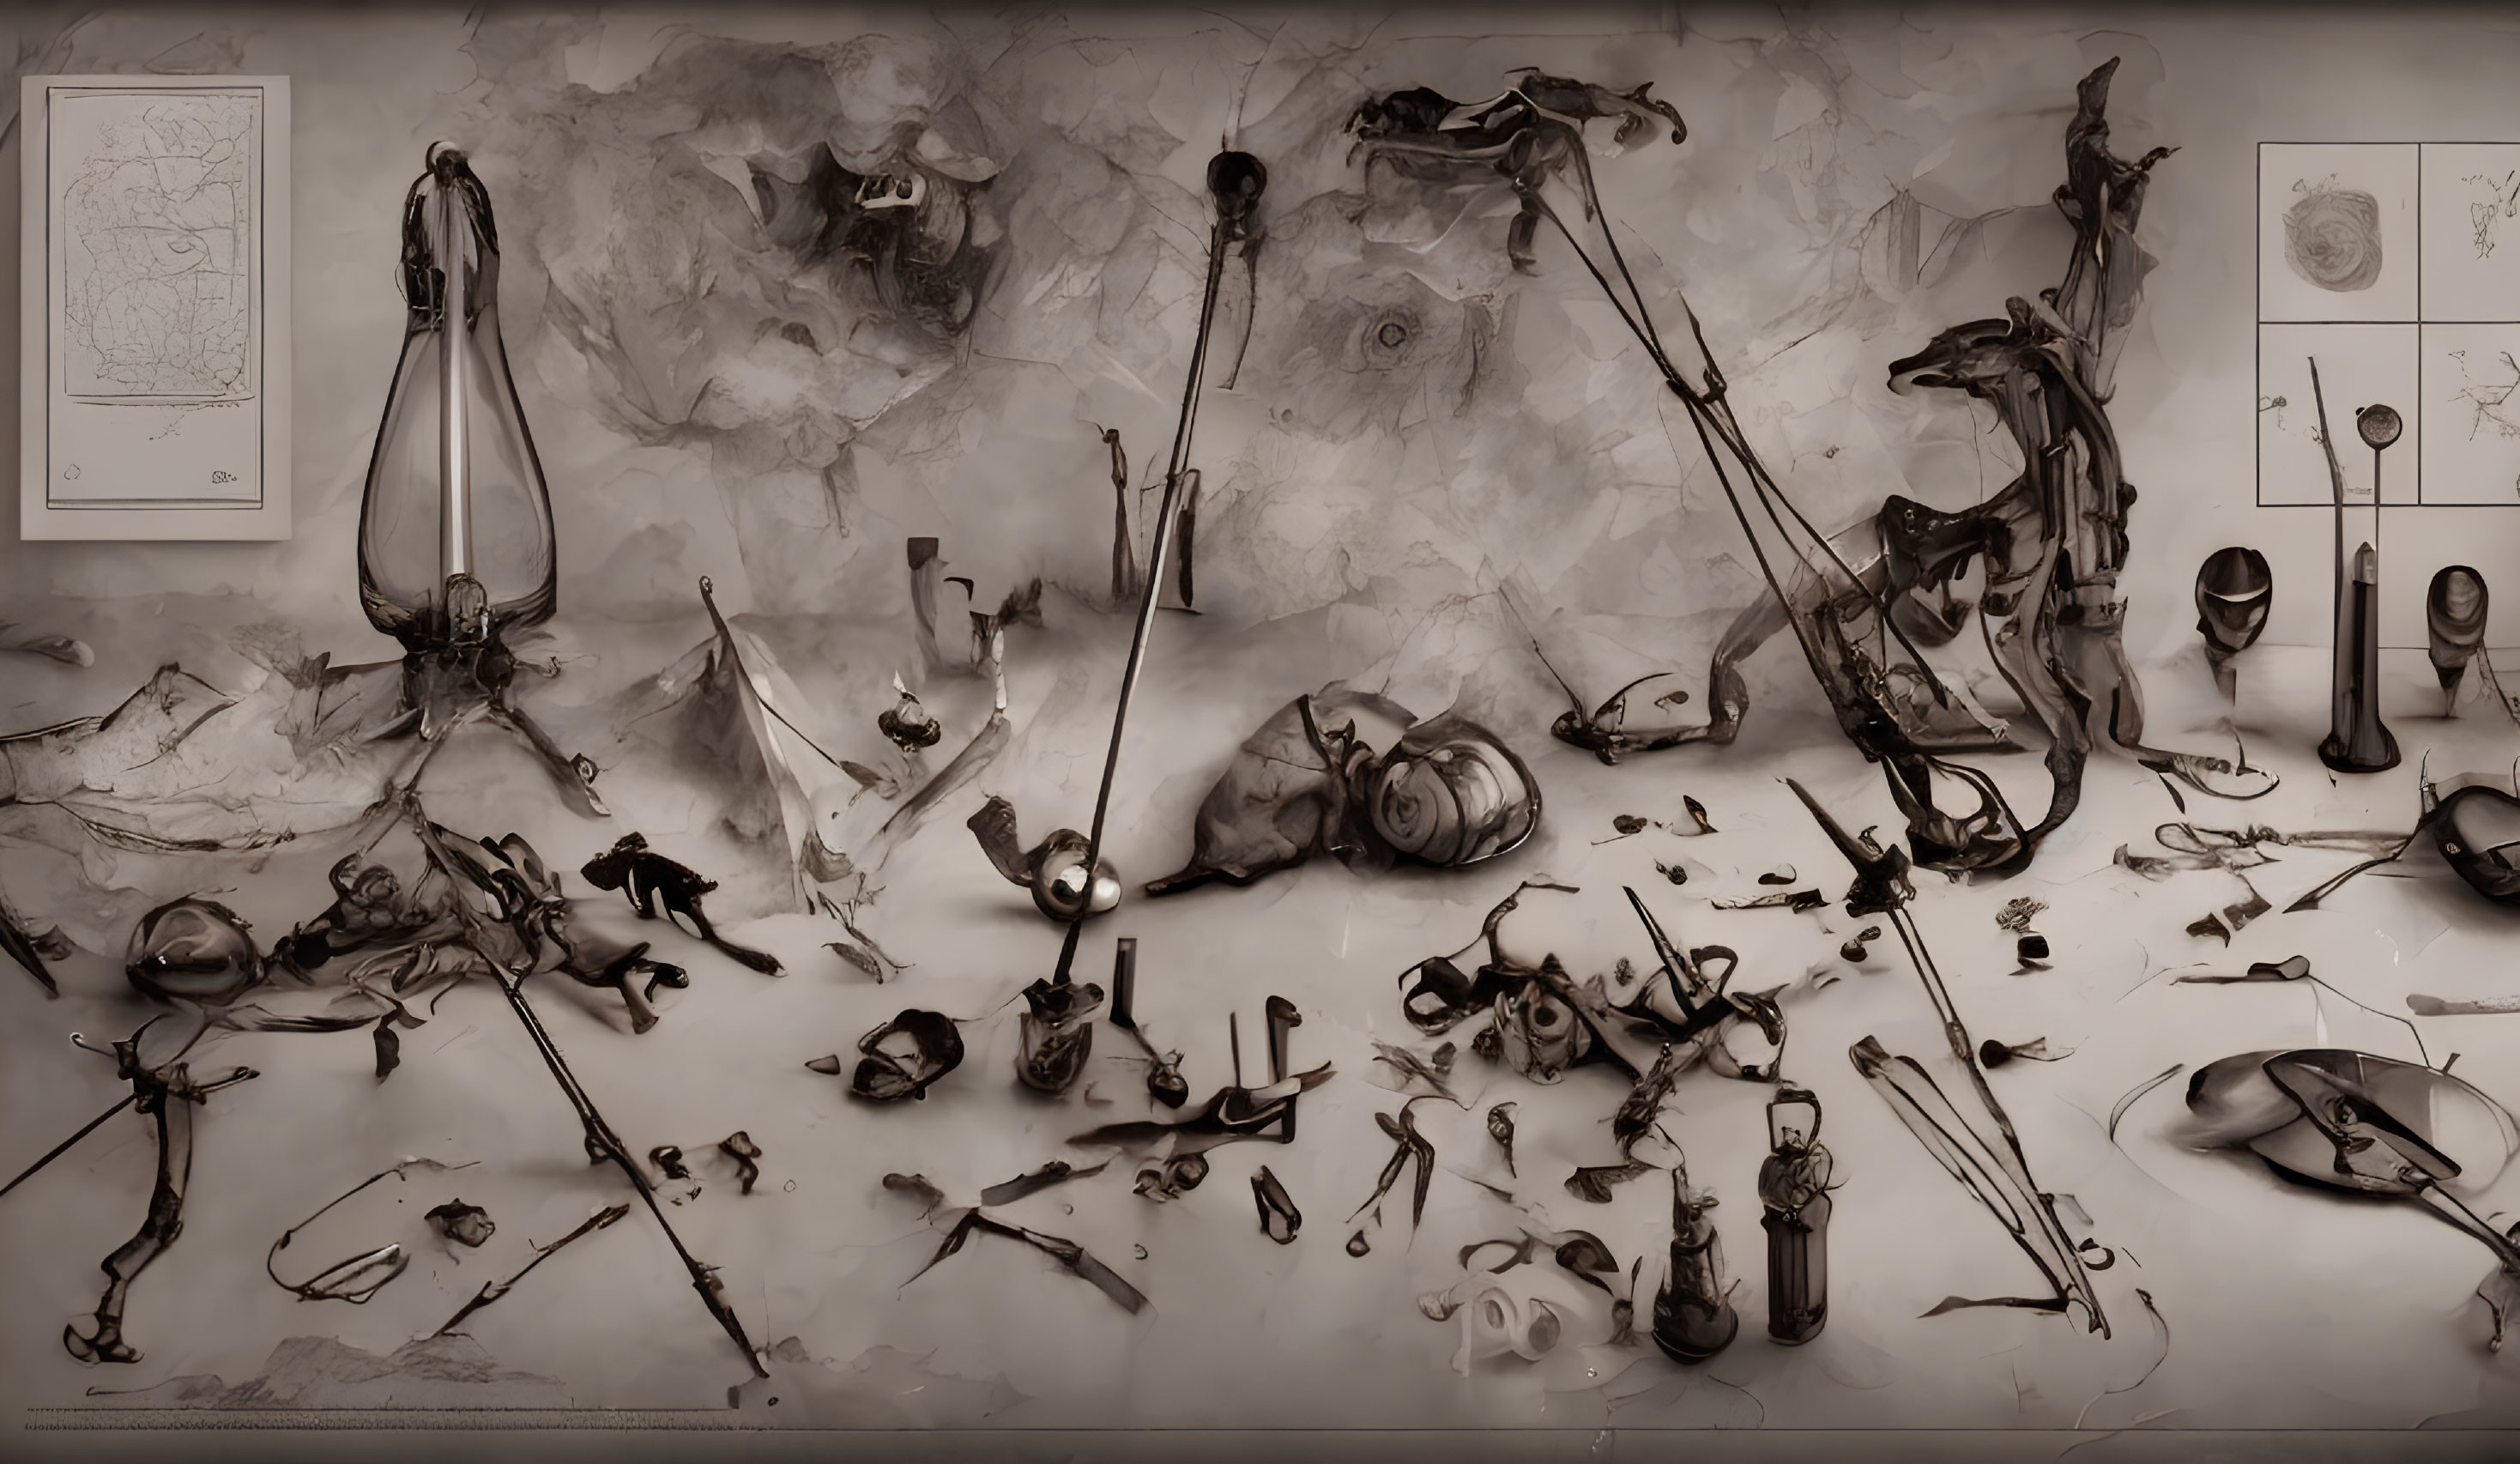 Medieval Weapons and Armor Displayed on Parchment Background